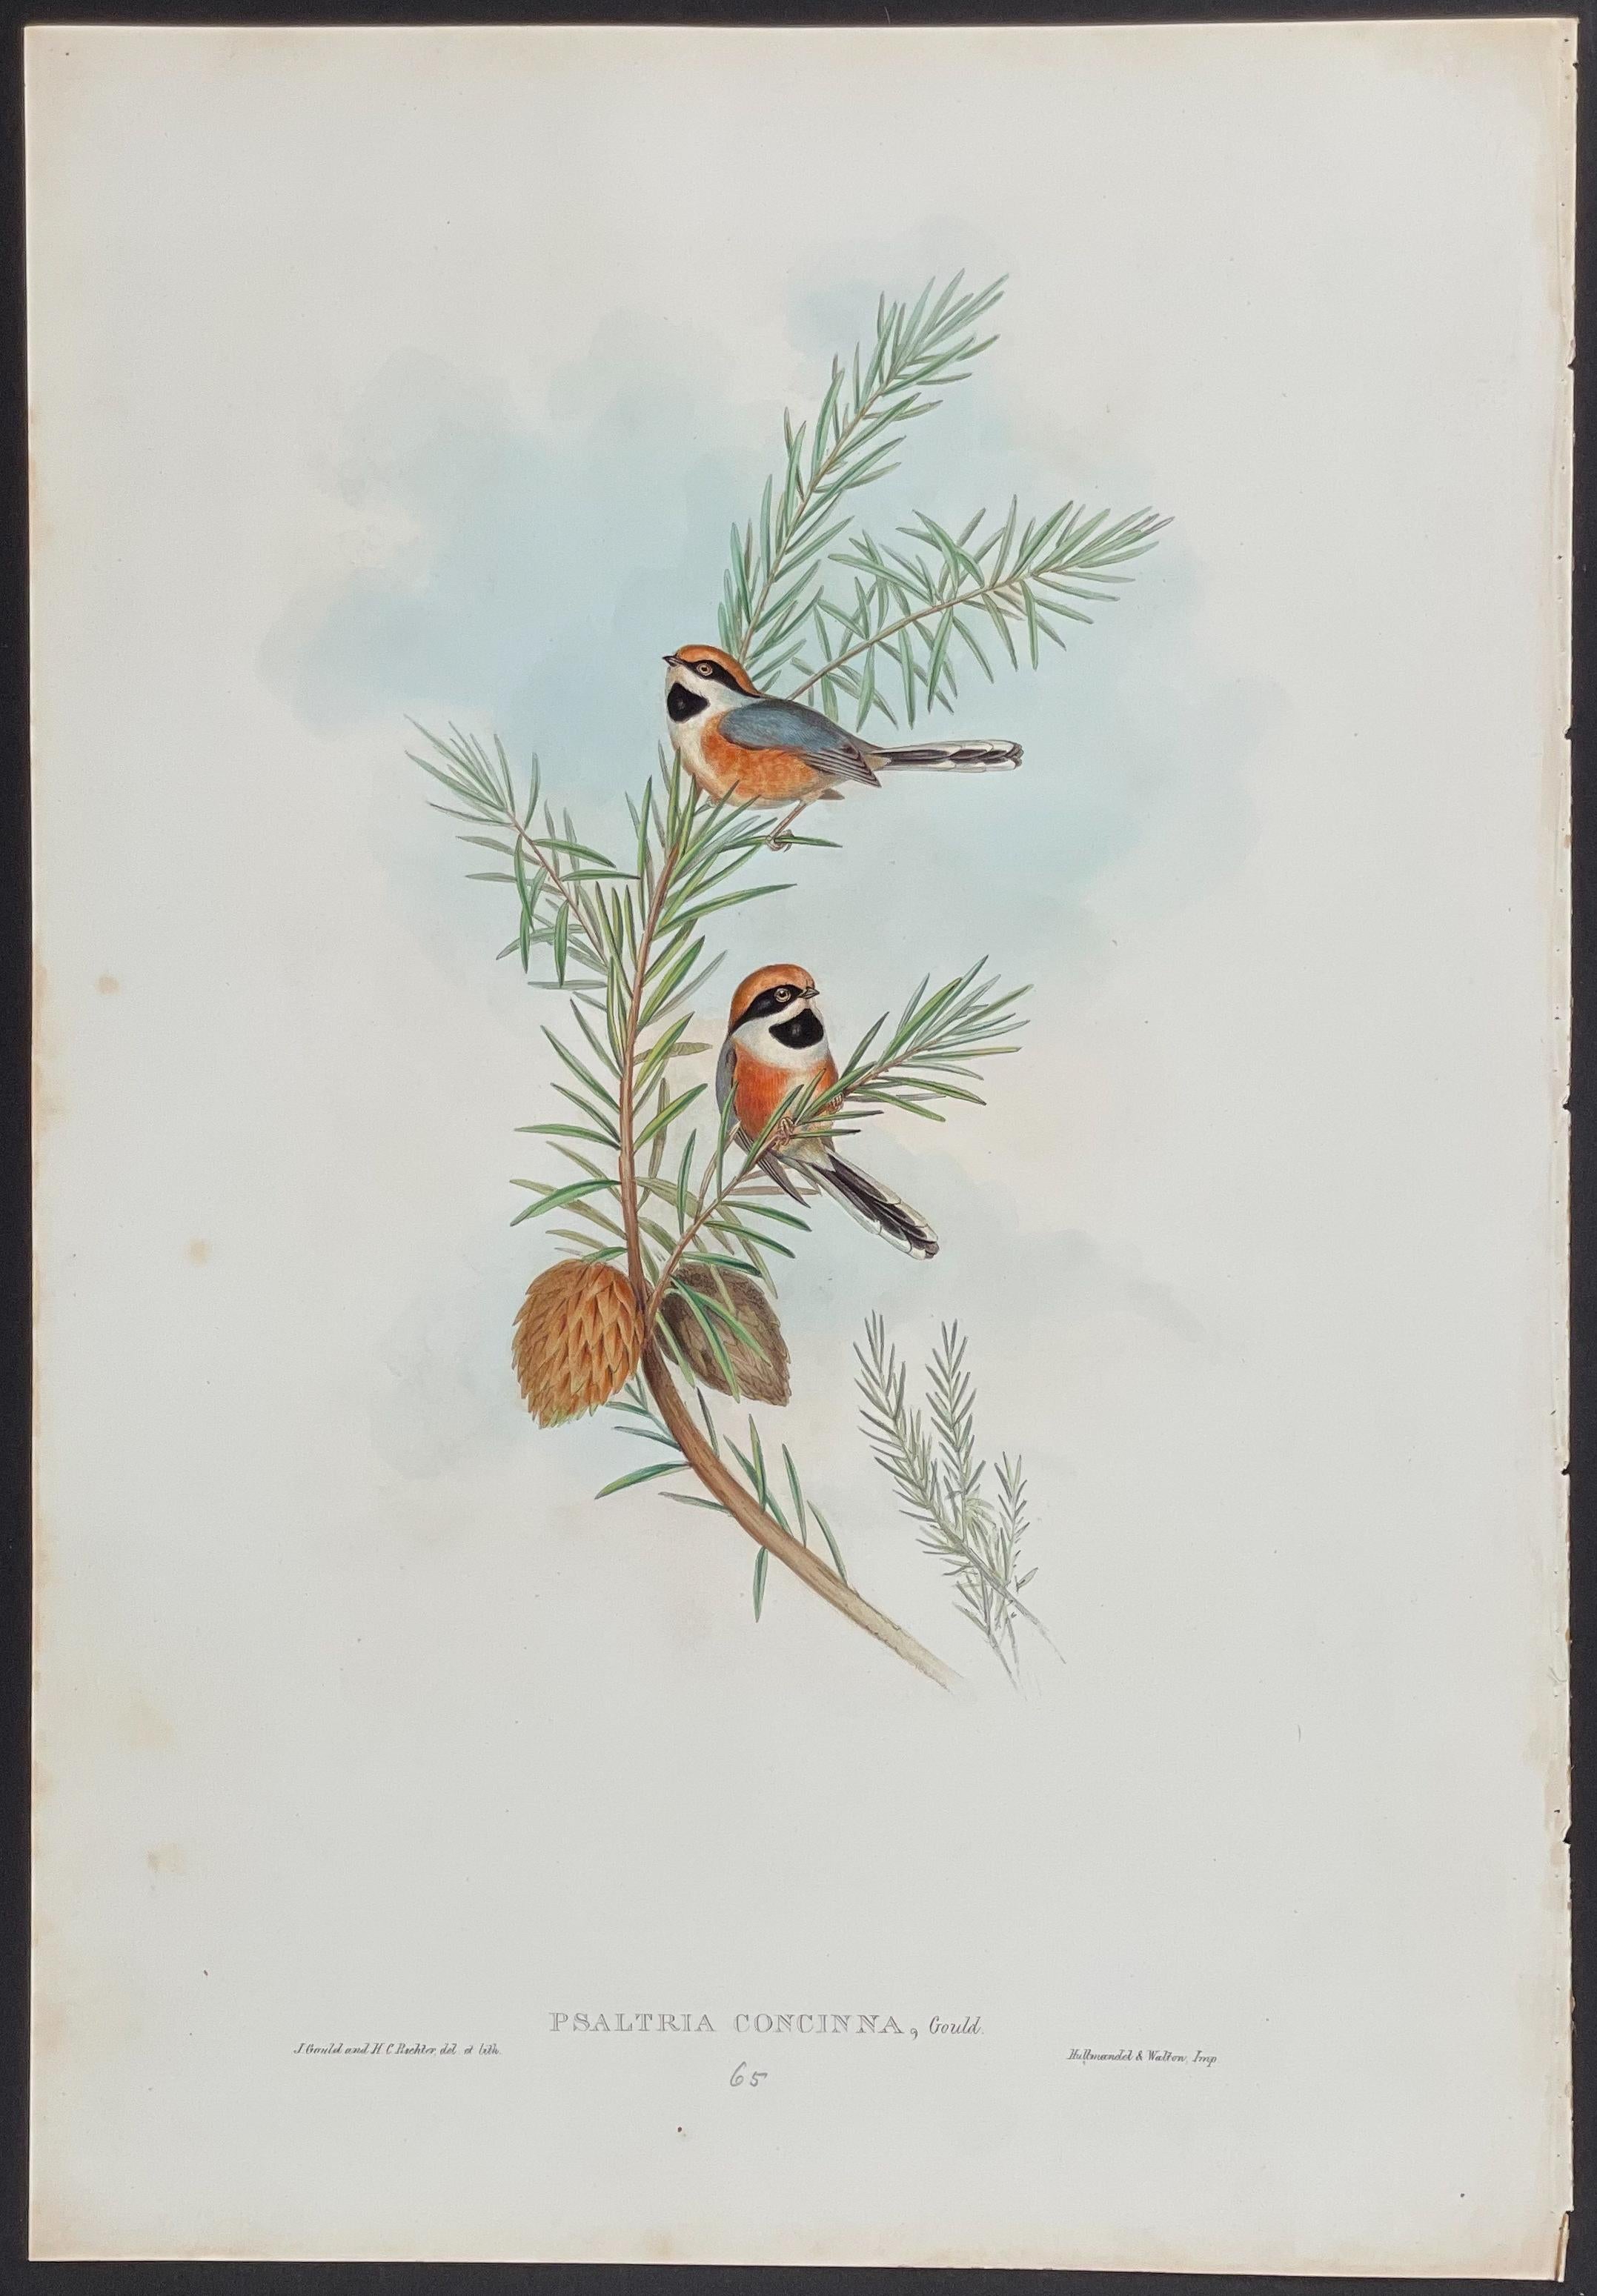 Elegant Tit - John Gould lithograph with hand-coloured
size 54 cm X 37 cm
excellent Condition


This remarkable ornithology lithograph with hand-finished colour is from the esteemed John Gould’s Birds of Asia published in London between 1850 and